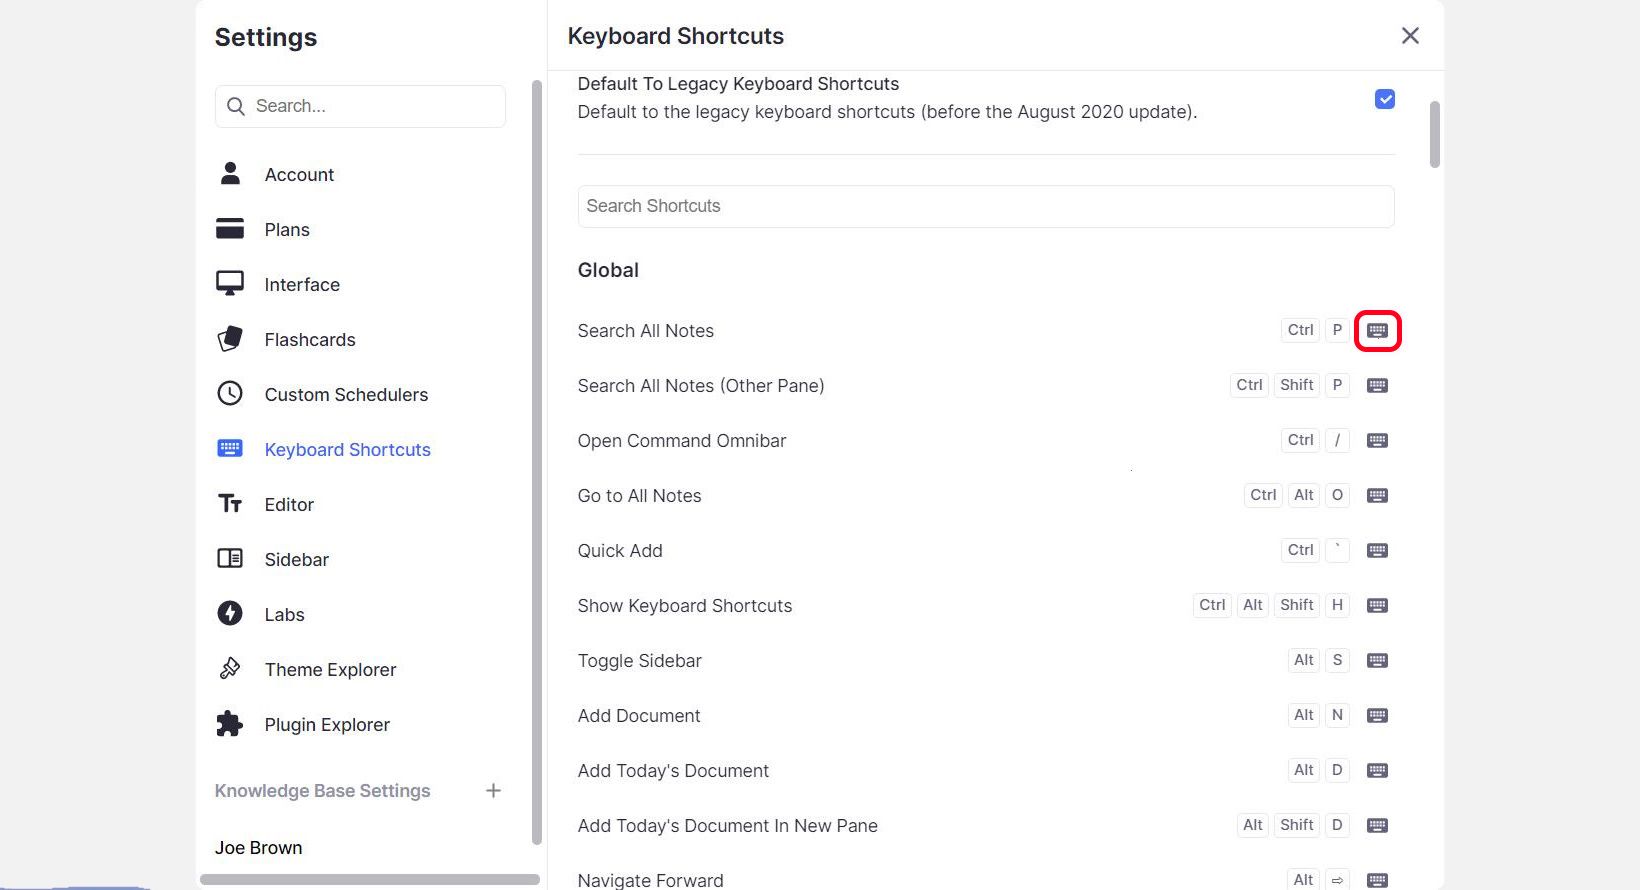 Customize Keyboard Shortcuts in RemNote